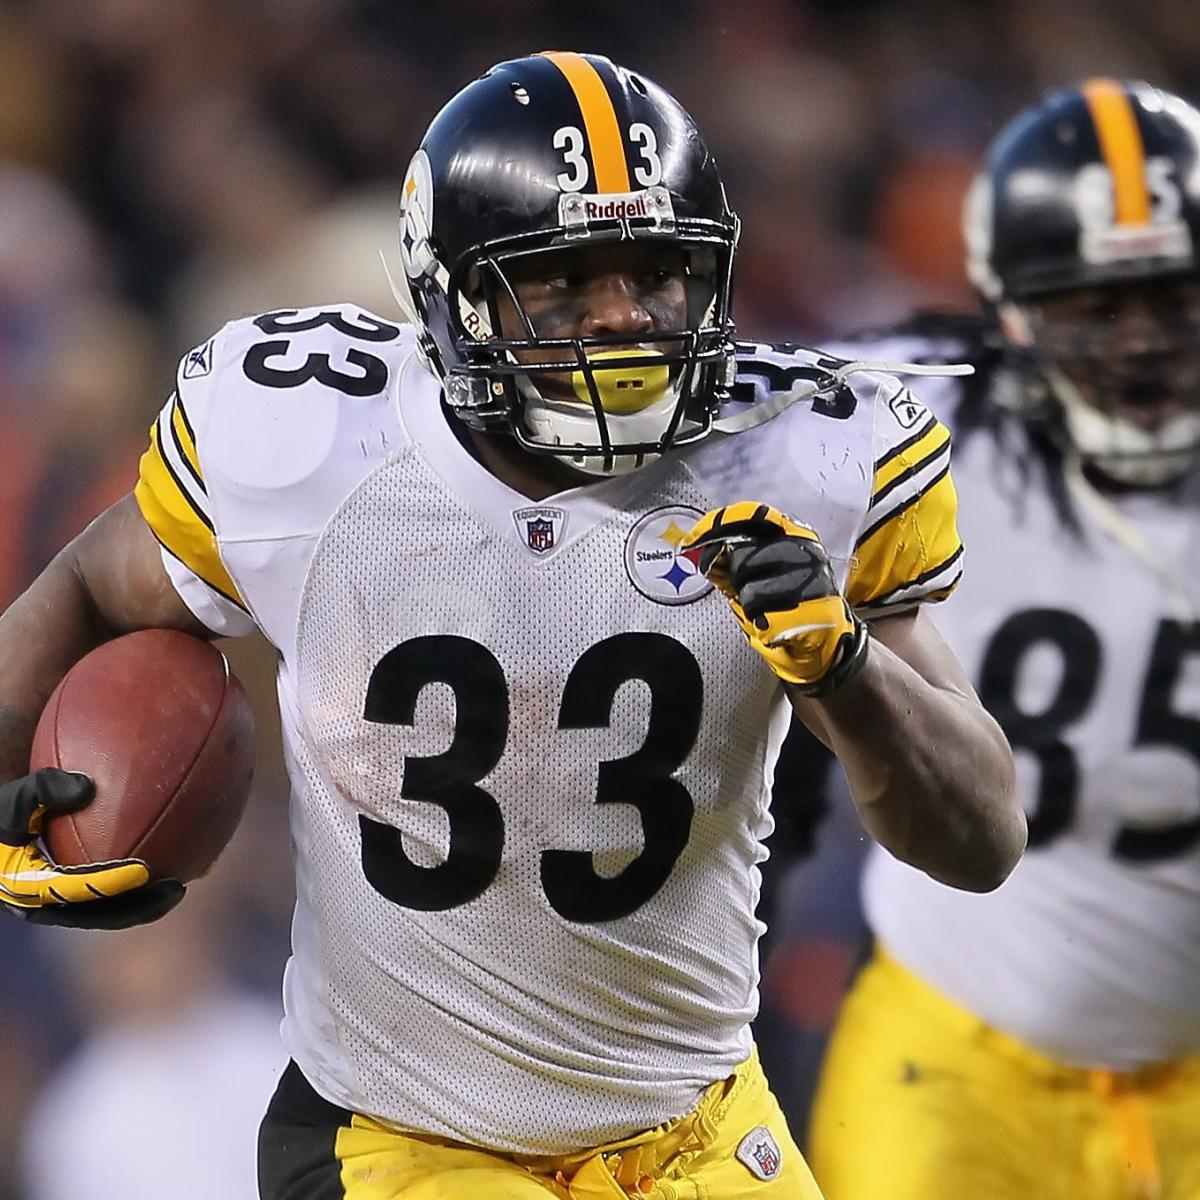 Spotlighting Pittsburgh Steelers RB Position Heading into the 2012 